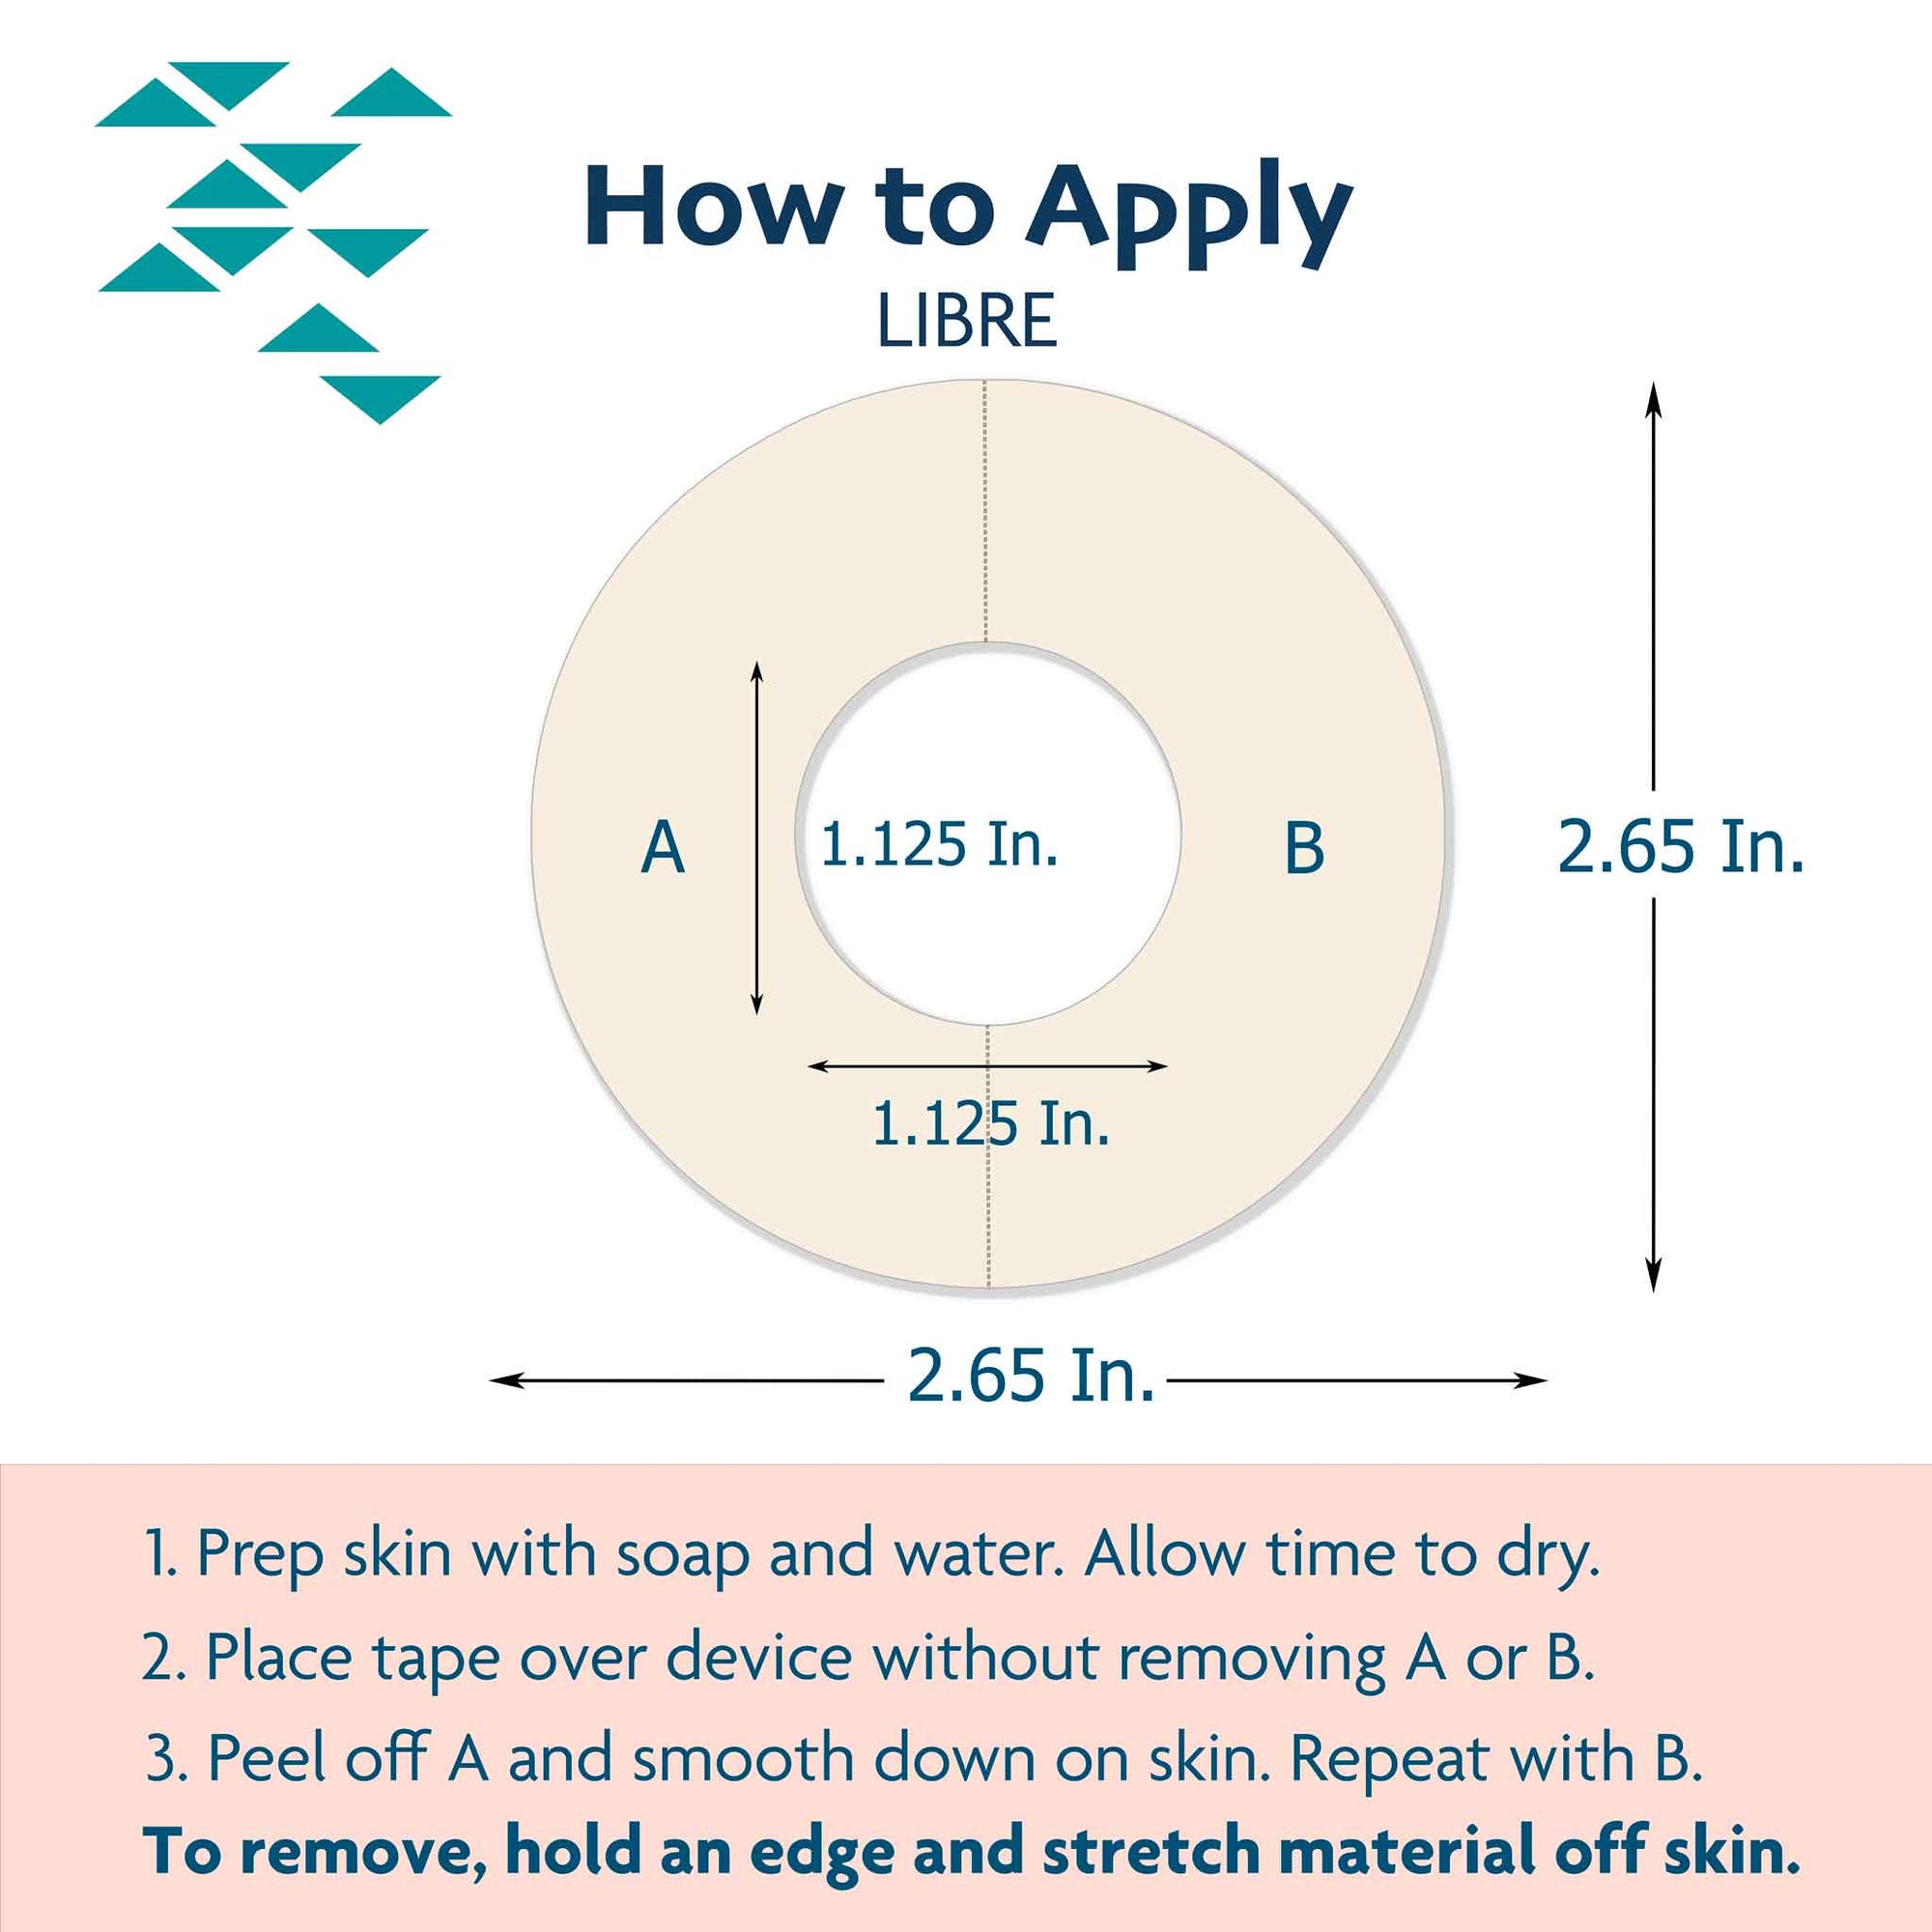 Libre Application how to apply tape over device